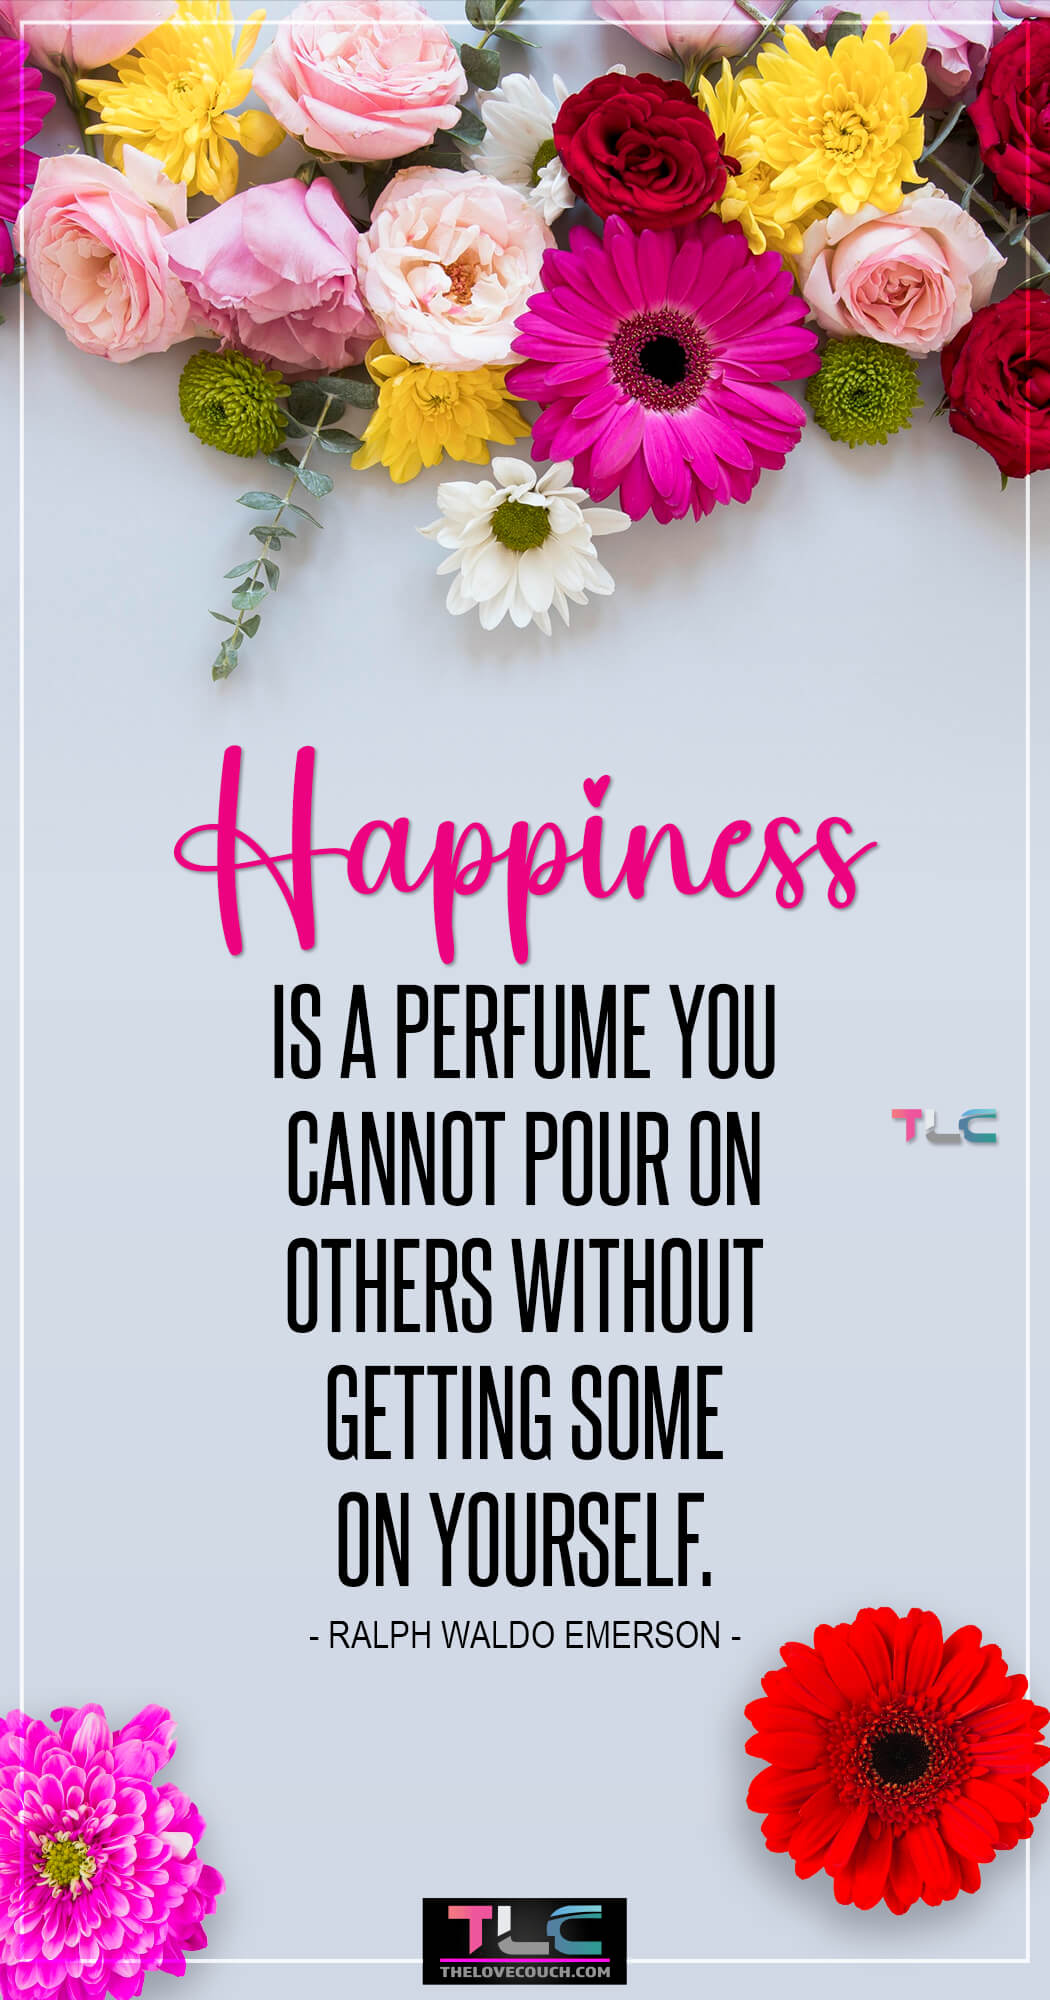 Best Happiness Quotes to Brighten Your Day